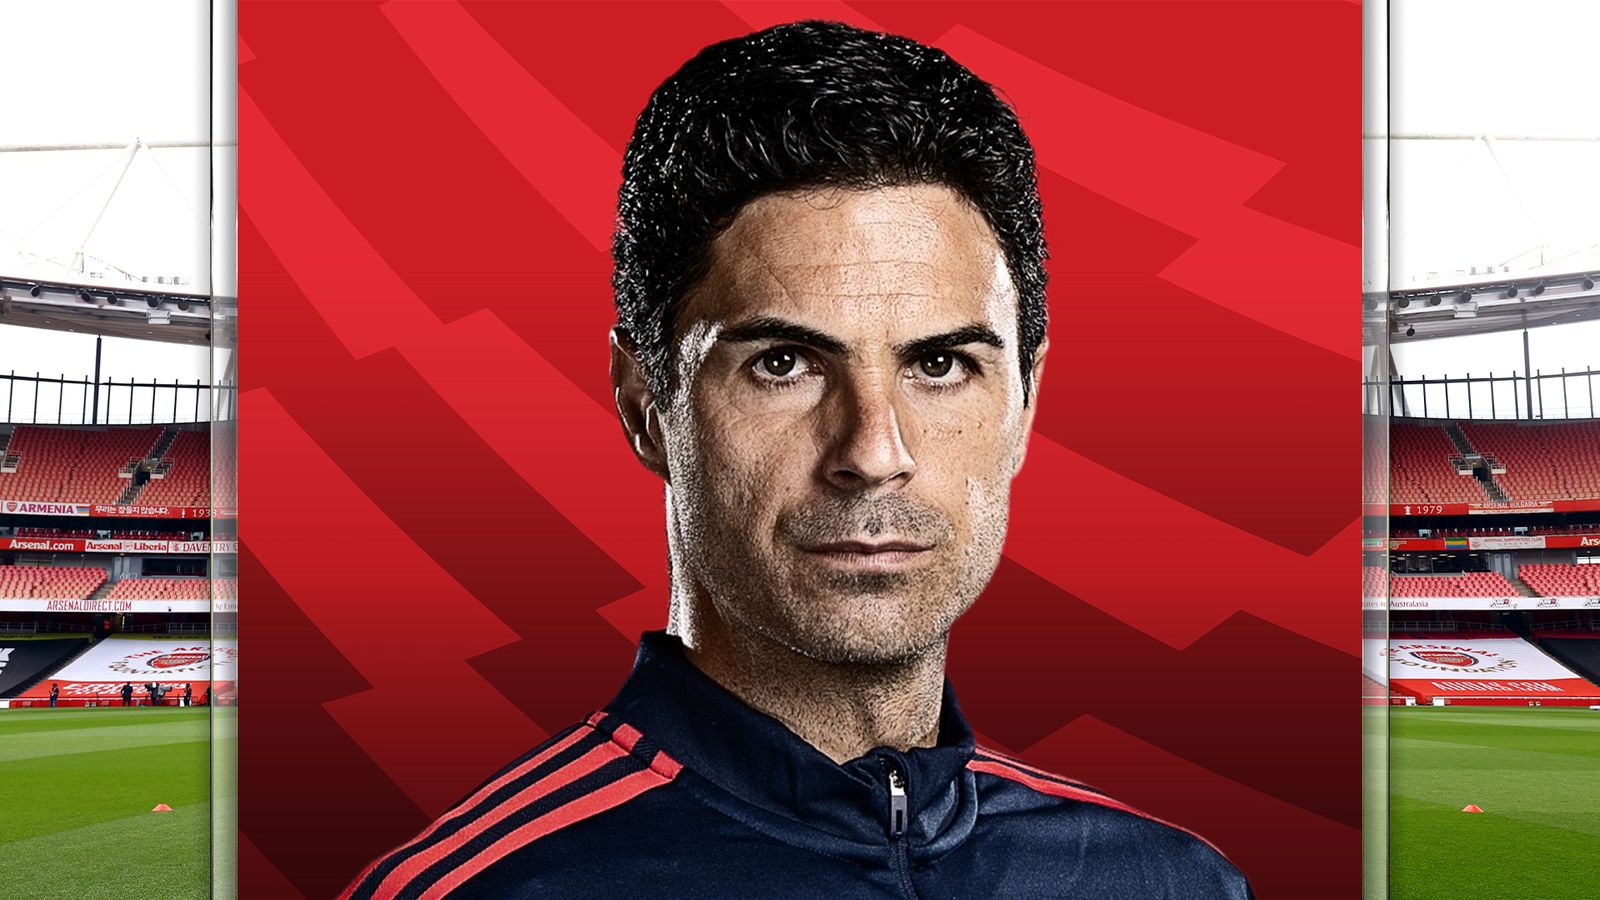 Mikel Arteta exclusive: Arsenal manager discusses his team’s improvement ahead of tricky Brentford return